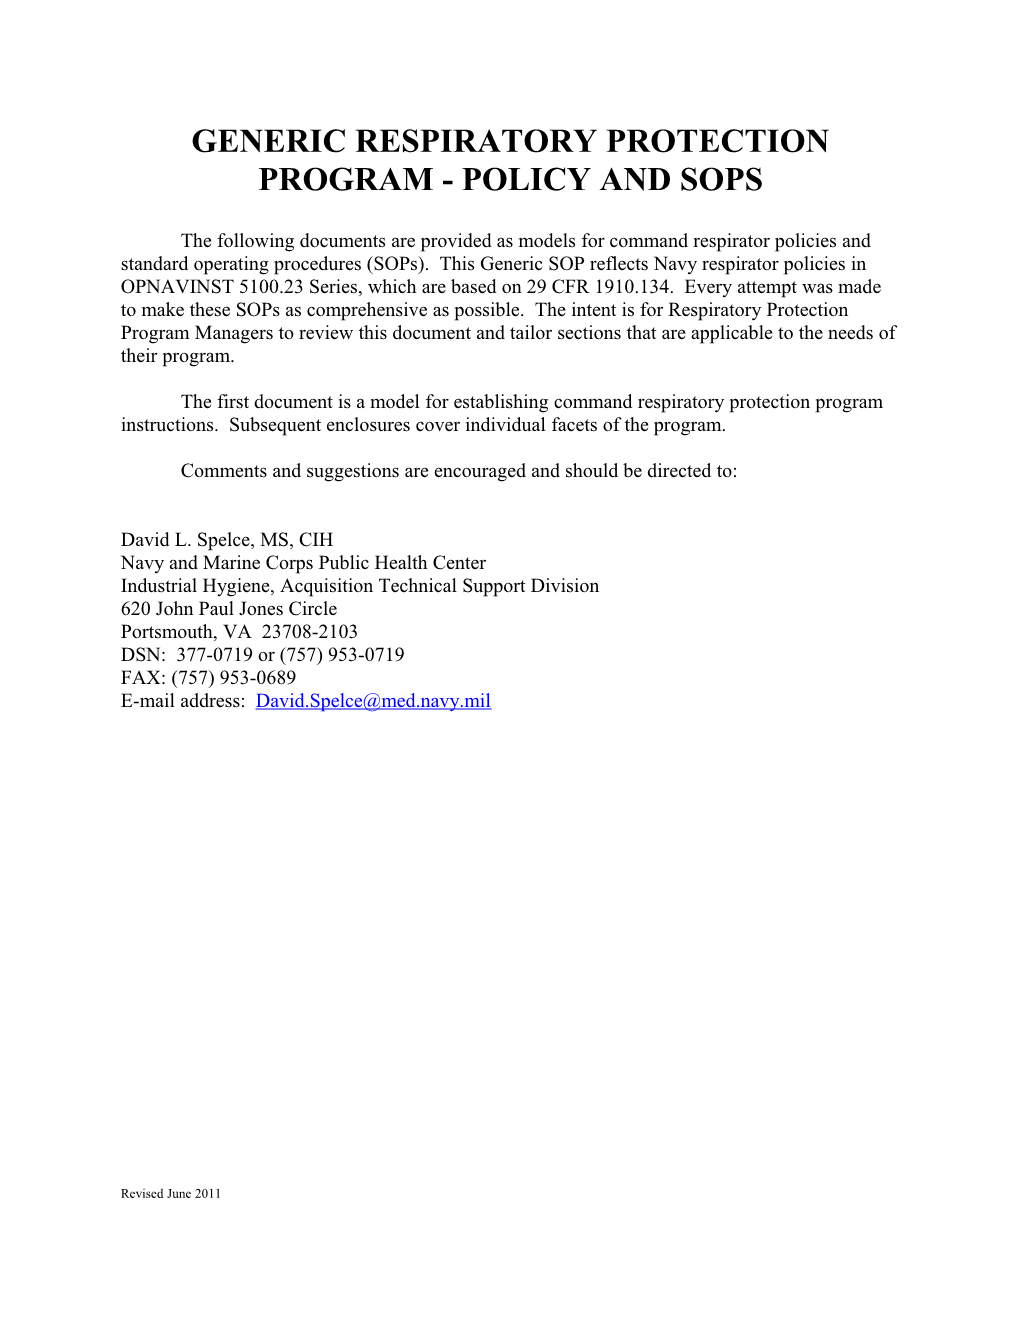 Generic Respiratory Protection Program - Policy and Sops